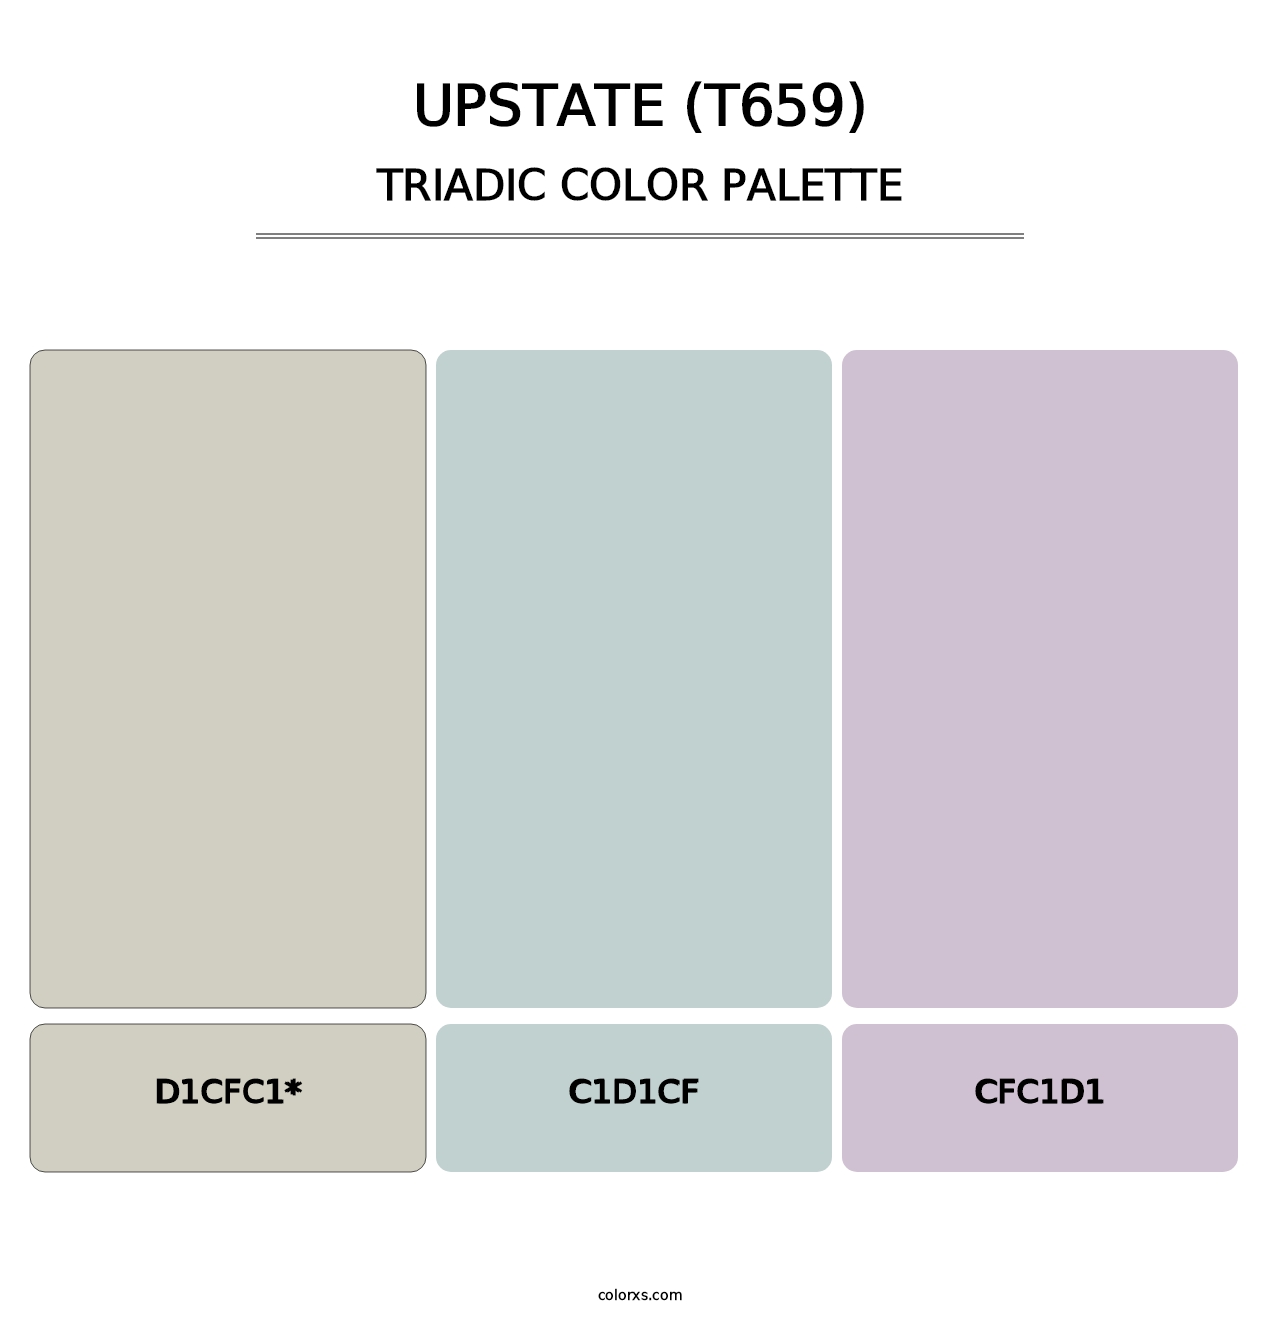 Upstate (T659) - Triadic Color Palette